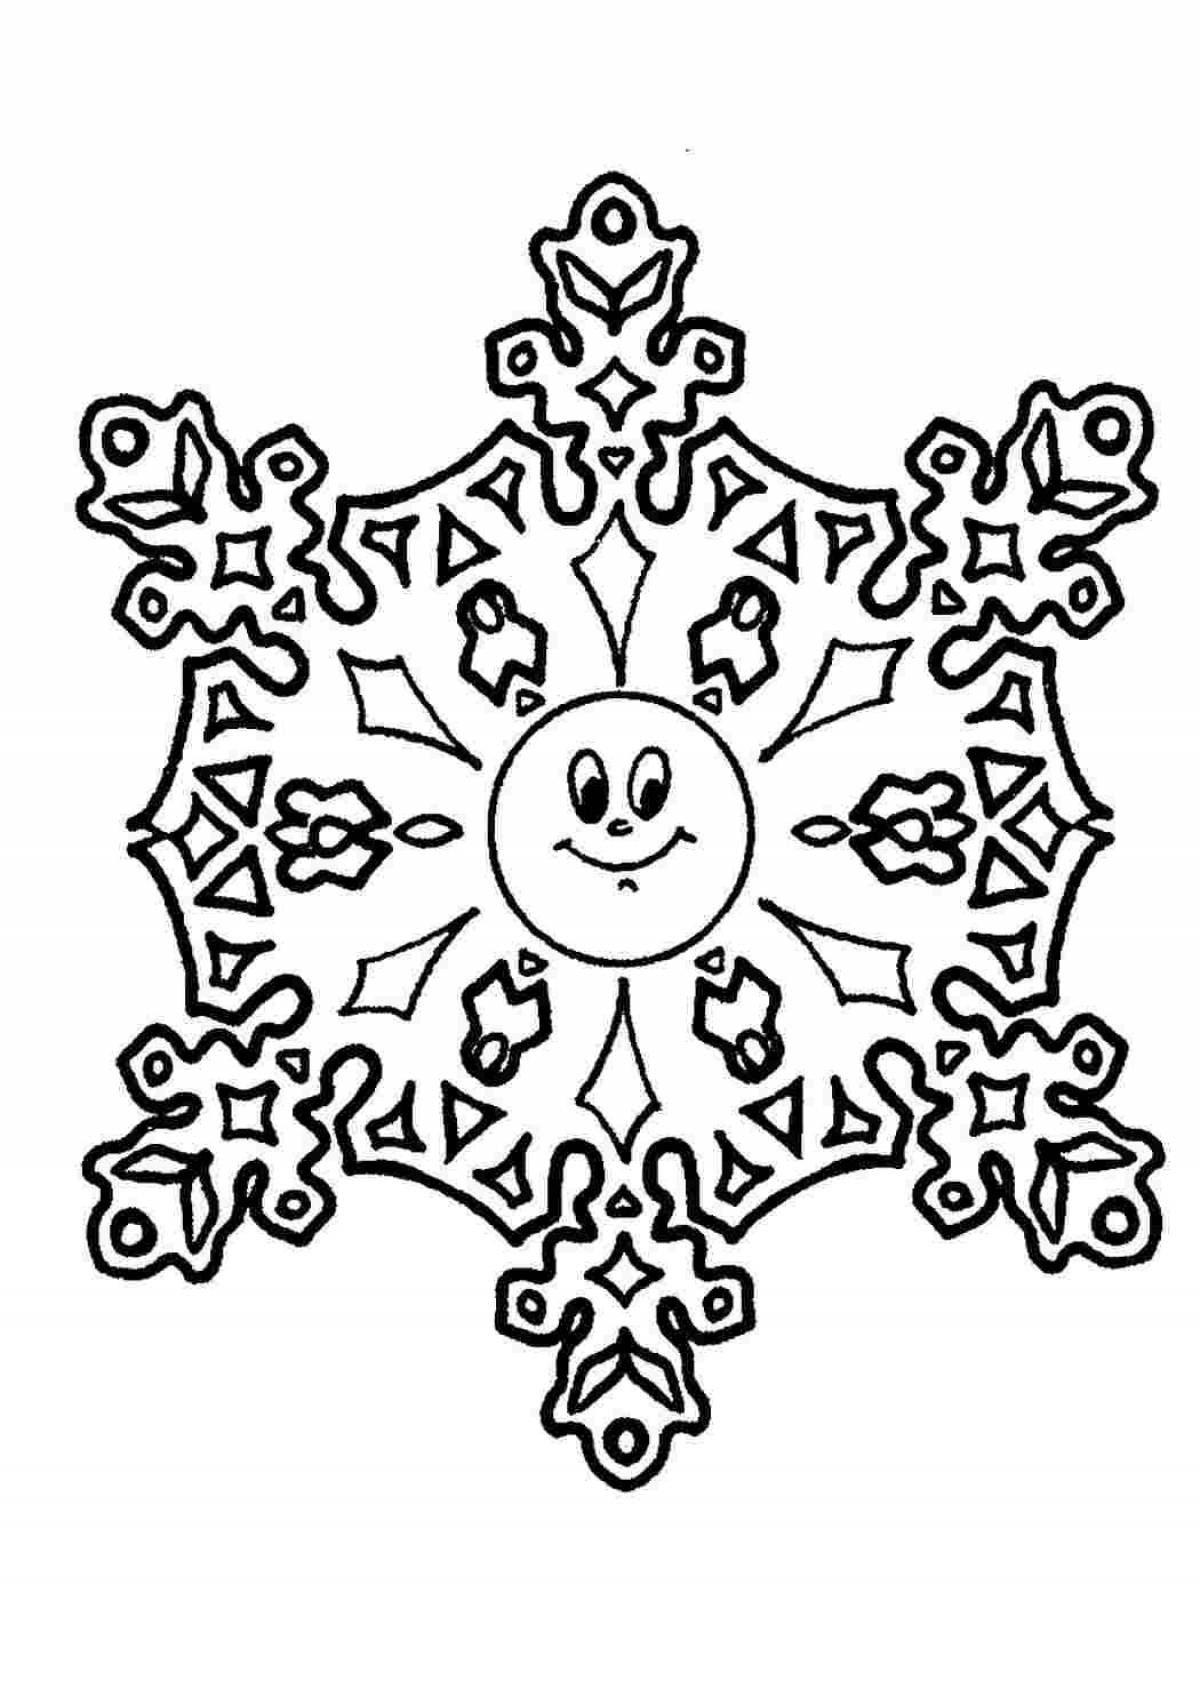 Creative snowflake coloring book for kids 5-6 years old